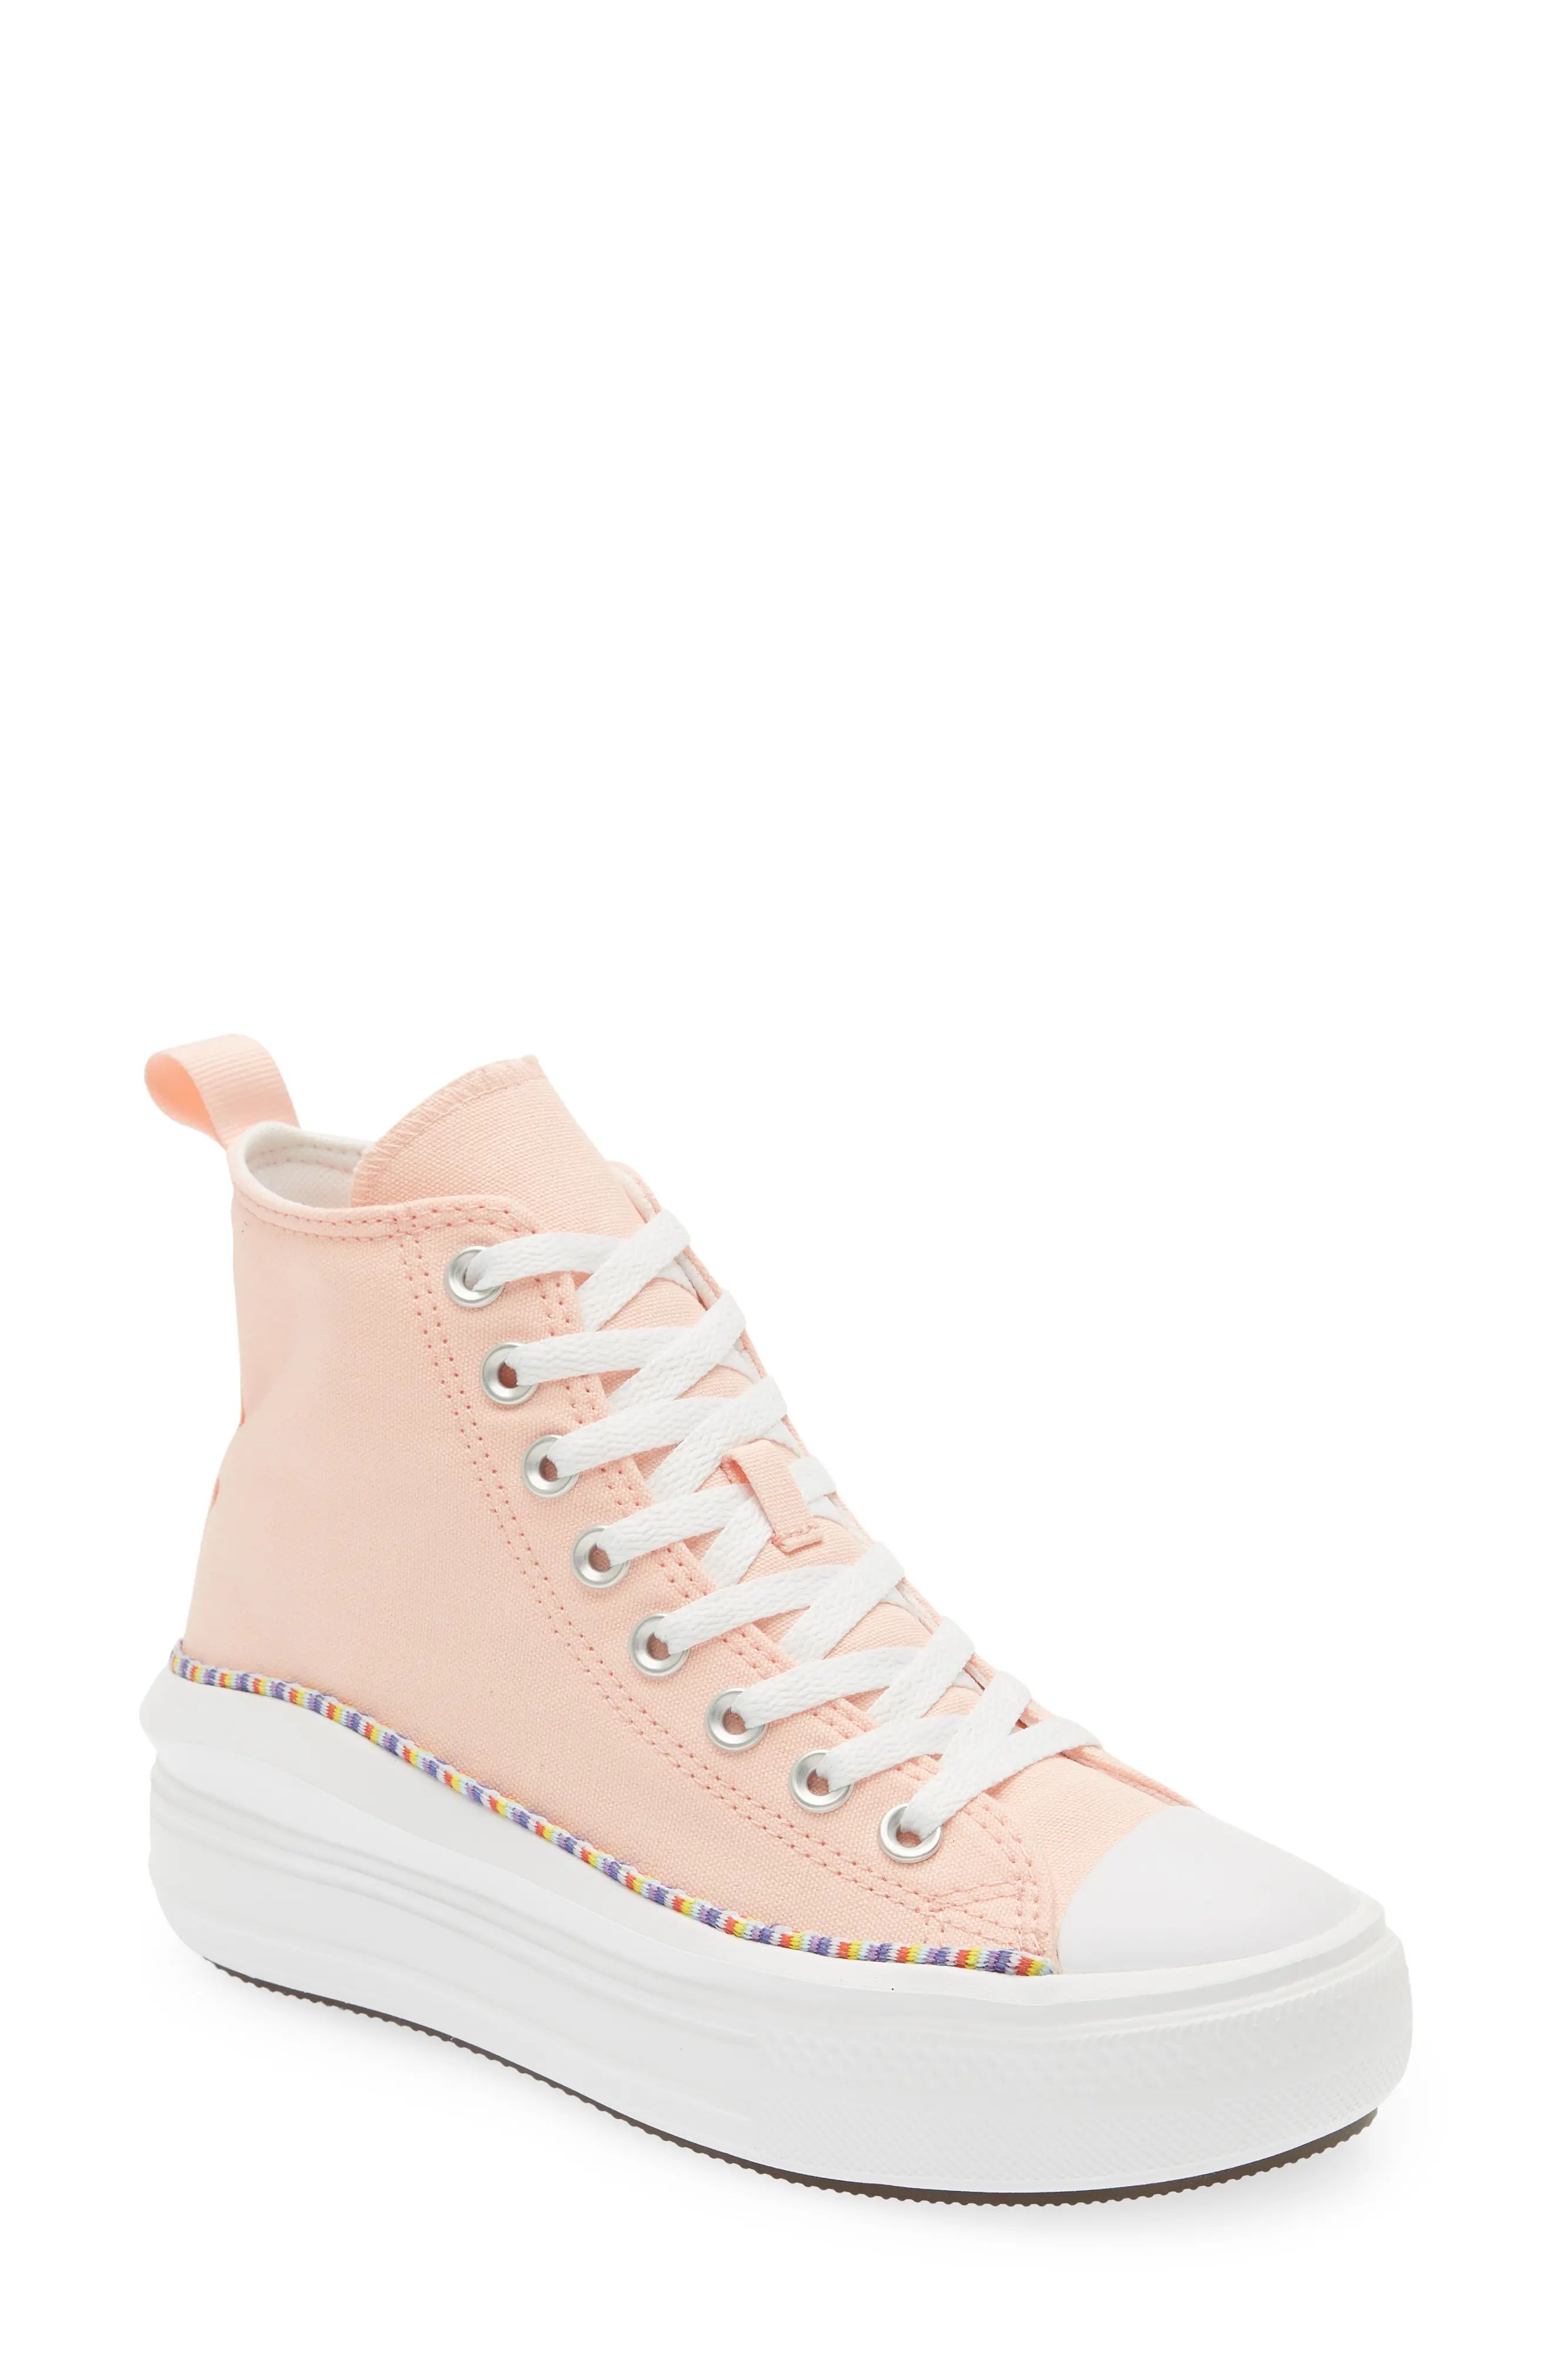 Converse Chuck Taylor(R) All Star(R) Move High Top Platform Sneaker in Pink/White at Nordstrom, Size | Nordstrom